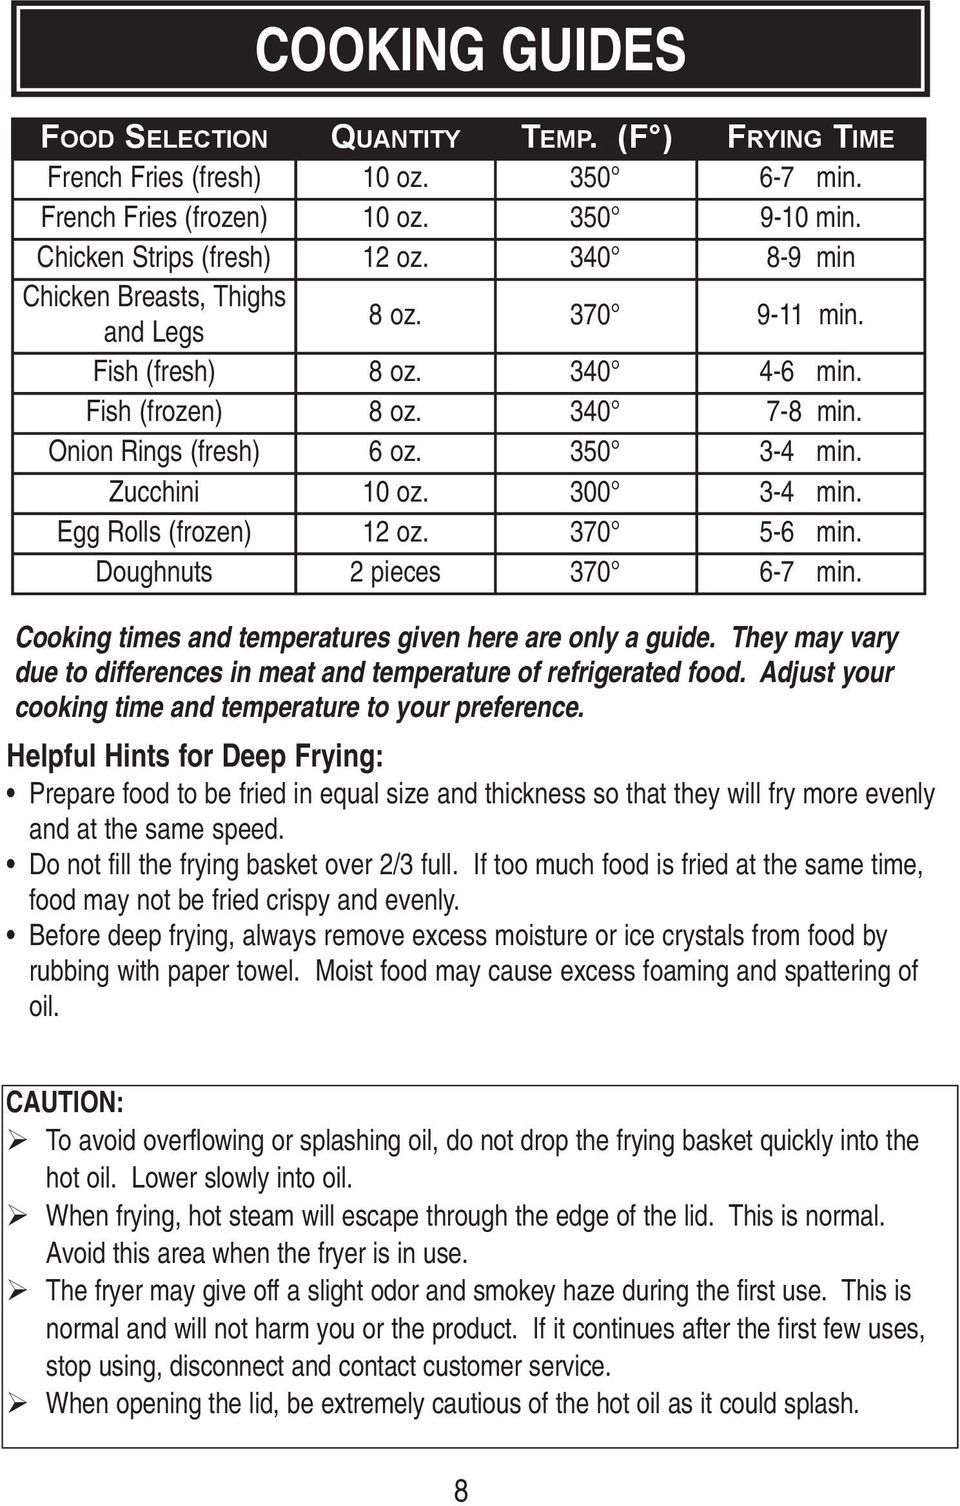 Egg Rolls (frozen) 12 oz. 370 5-6 min. Doughnuts 2 pieces 370 6-7 min. Cooking times and temperatures given here are only a guide.